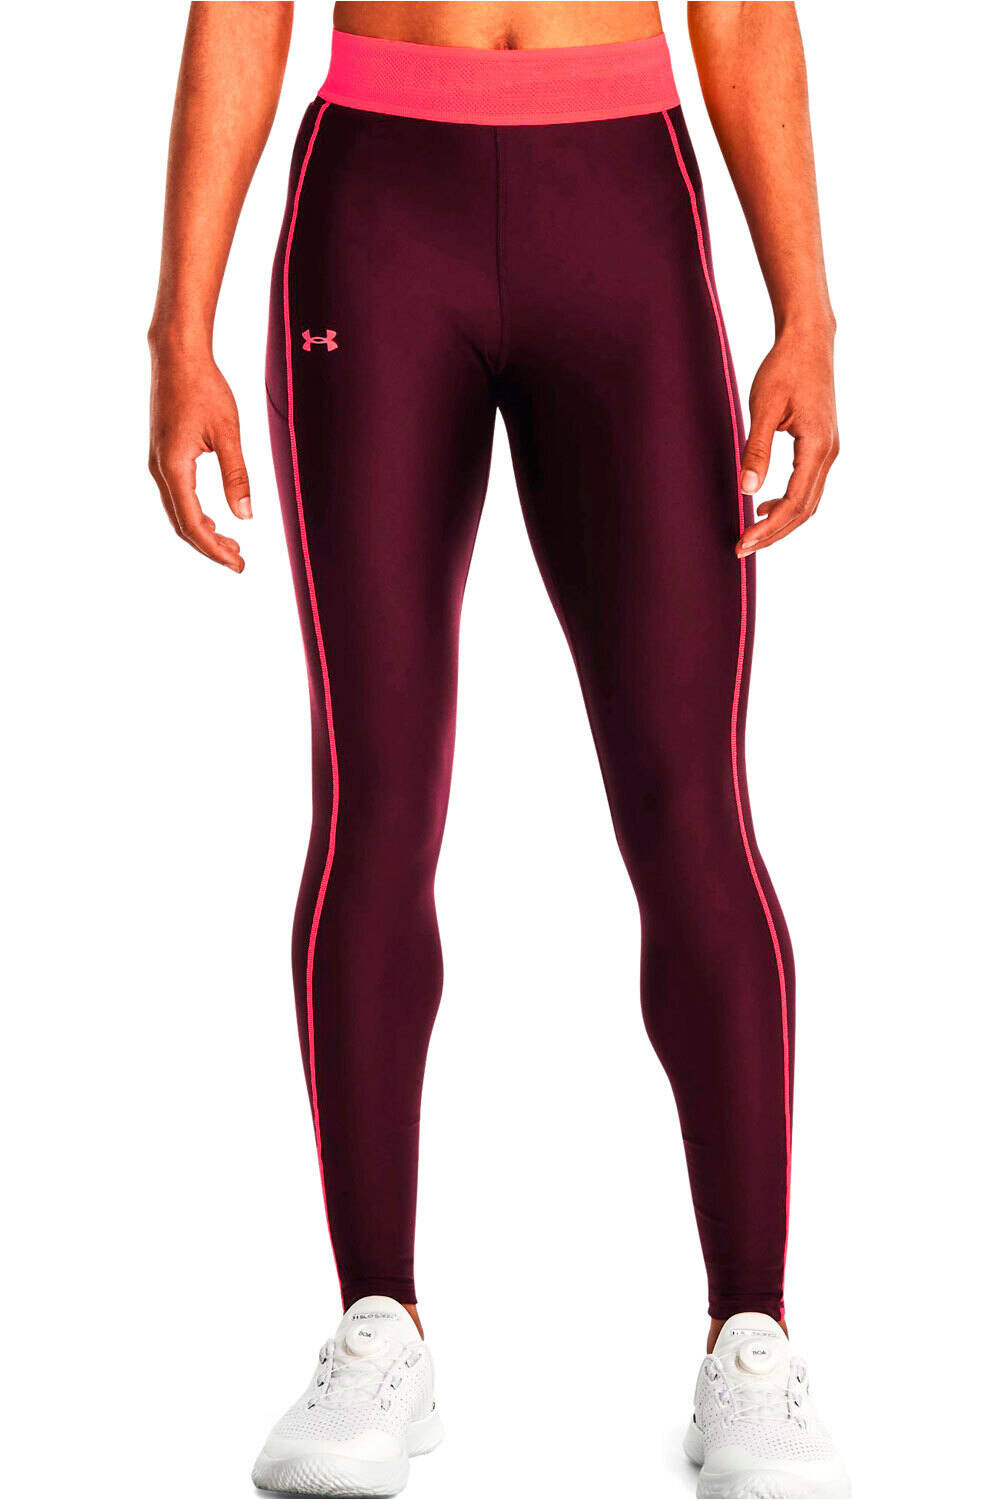 Under Armour pantalones y mallas largas fitness mujer Armour Branded WB Leg vista frontal